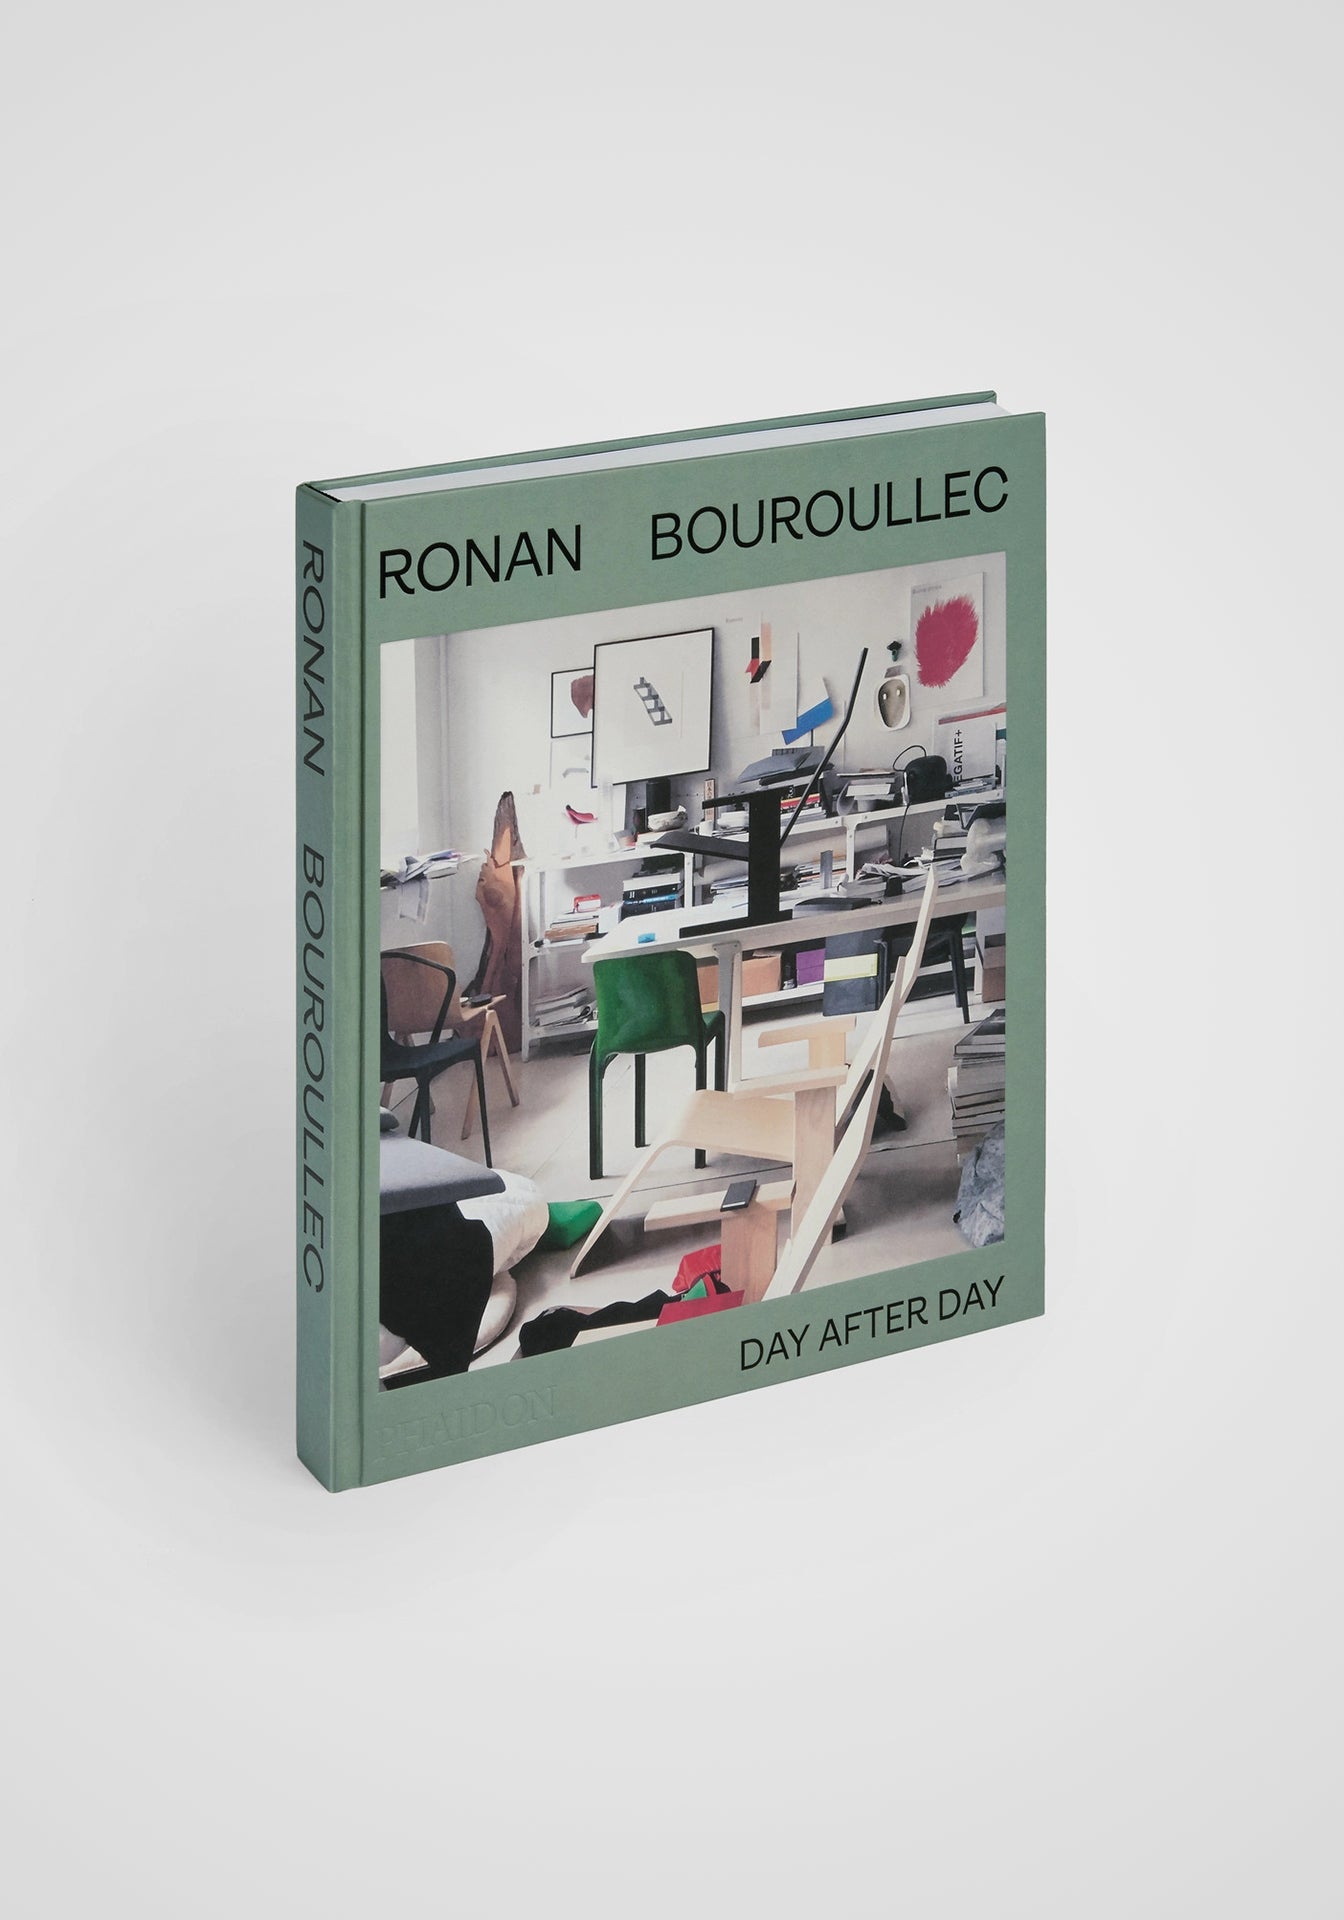 Ronan Bouroullec: Day After Day